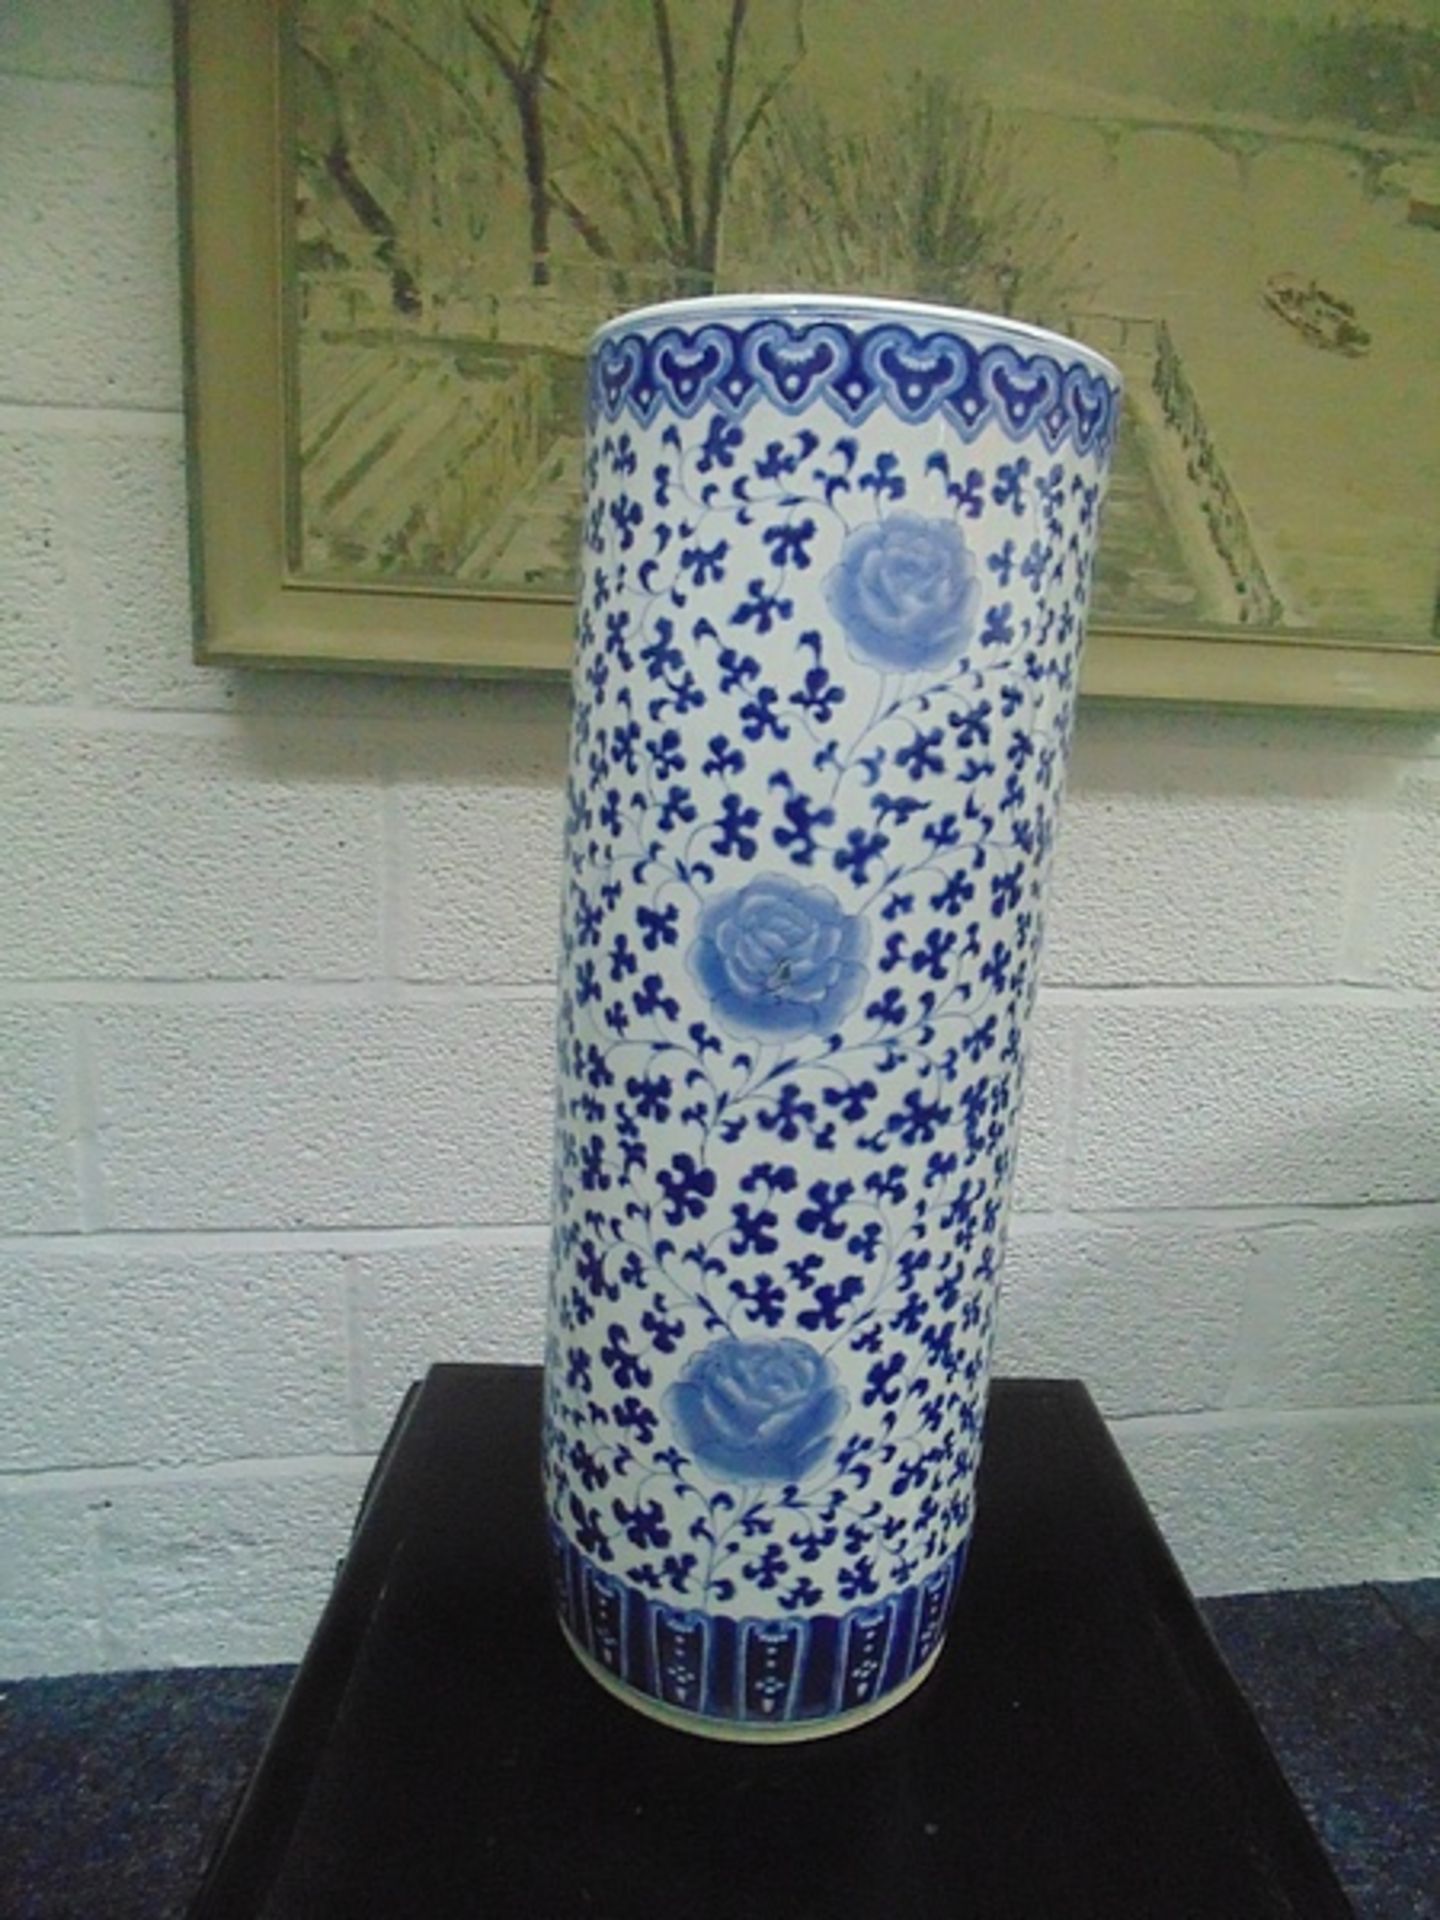 A Vibrantly Patterned Umbrella Cane Stand Cylindrical 600mm Adapted From Botanical Studies Green And